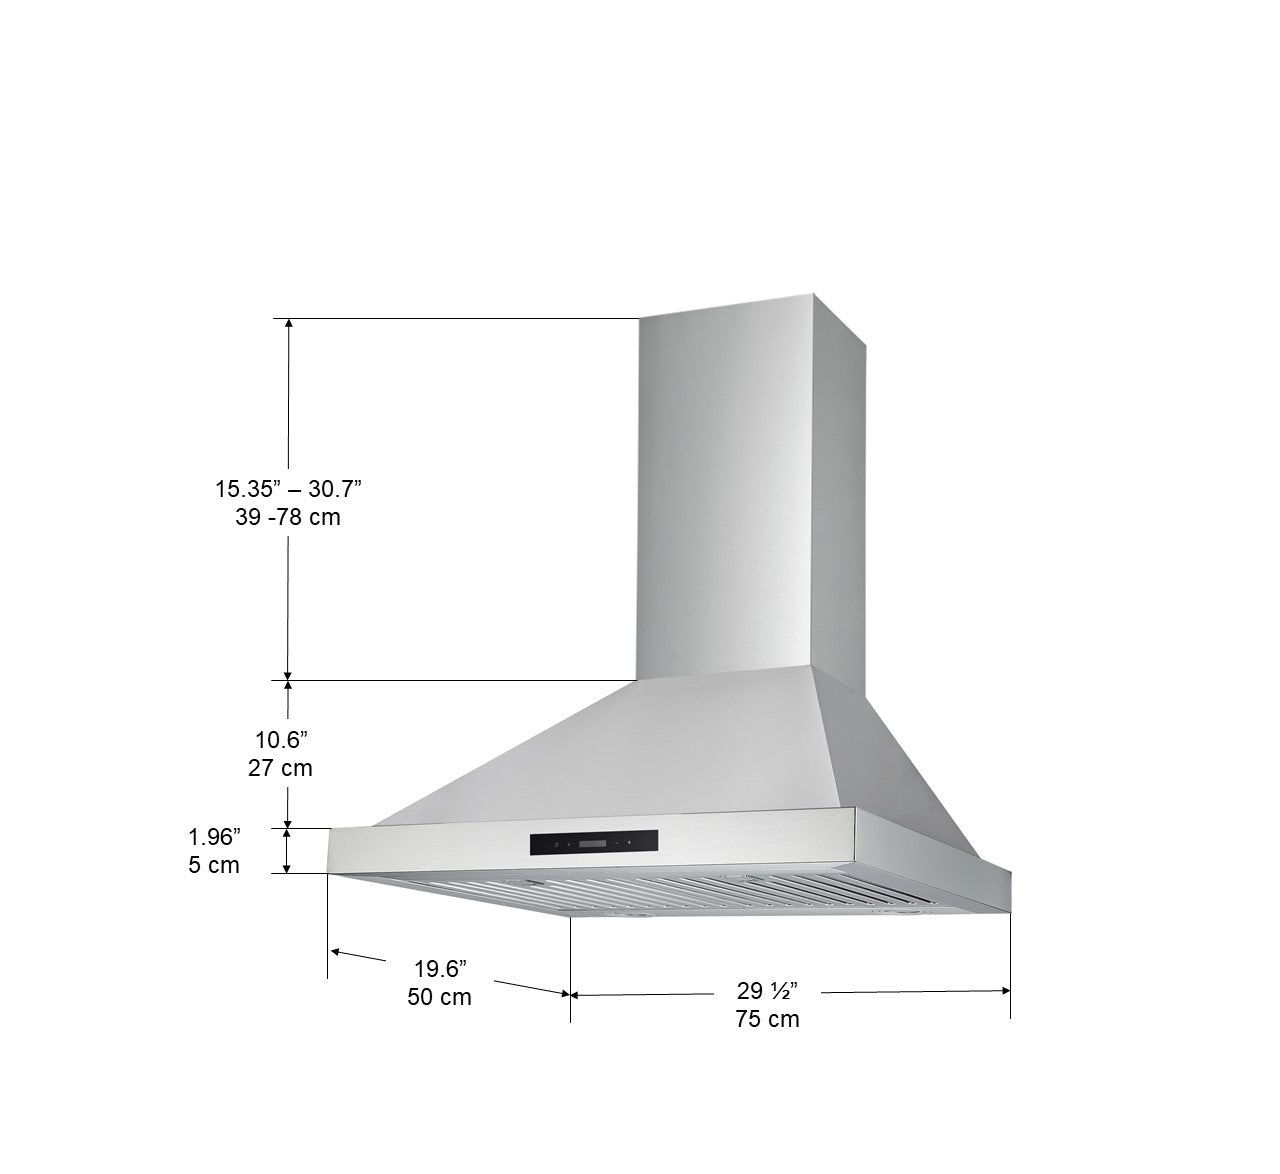 WPRL430 30 in. Convertible Wall Mount Range Hood Pyramid Style in Stainless Steel